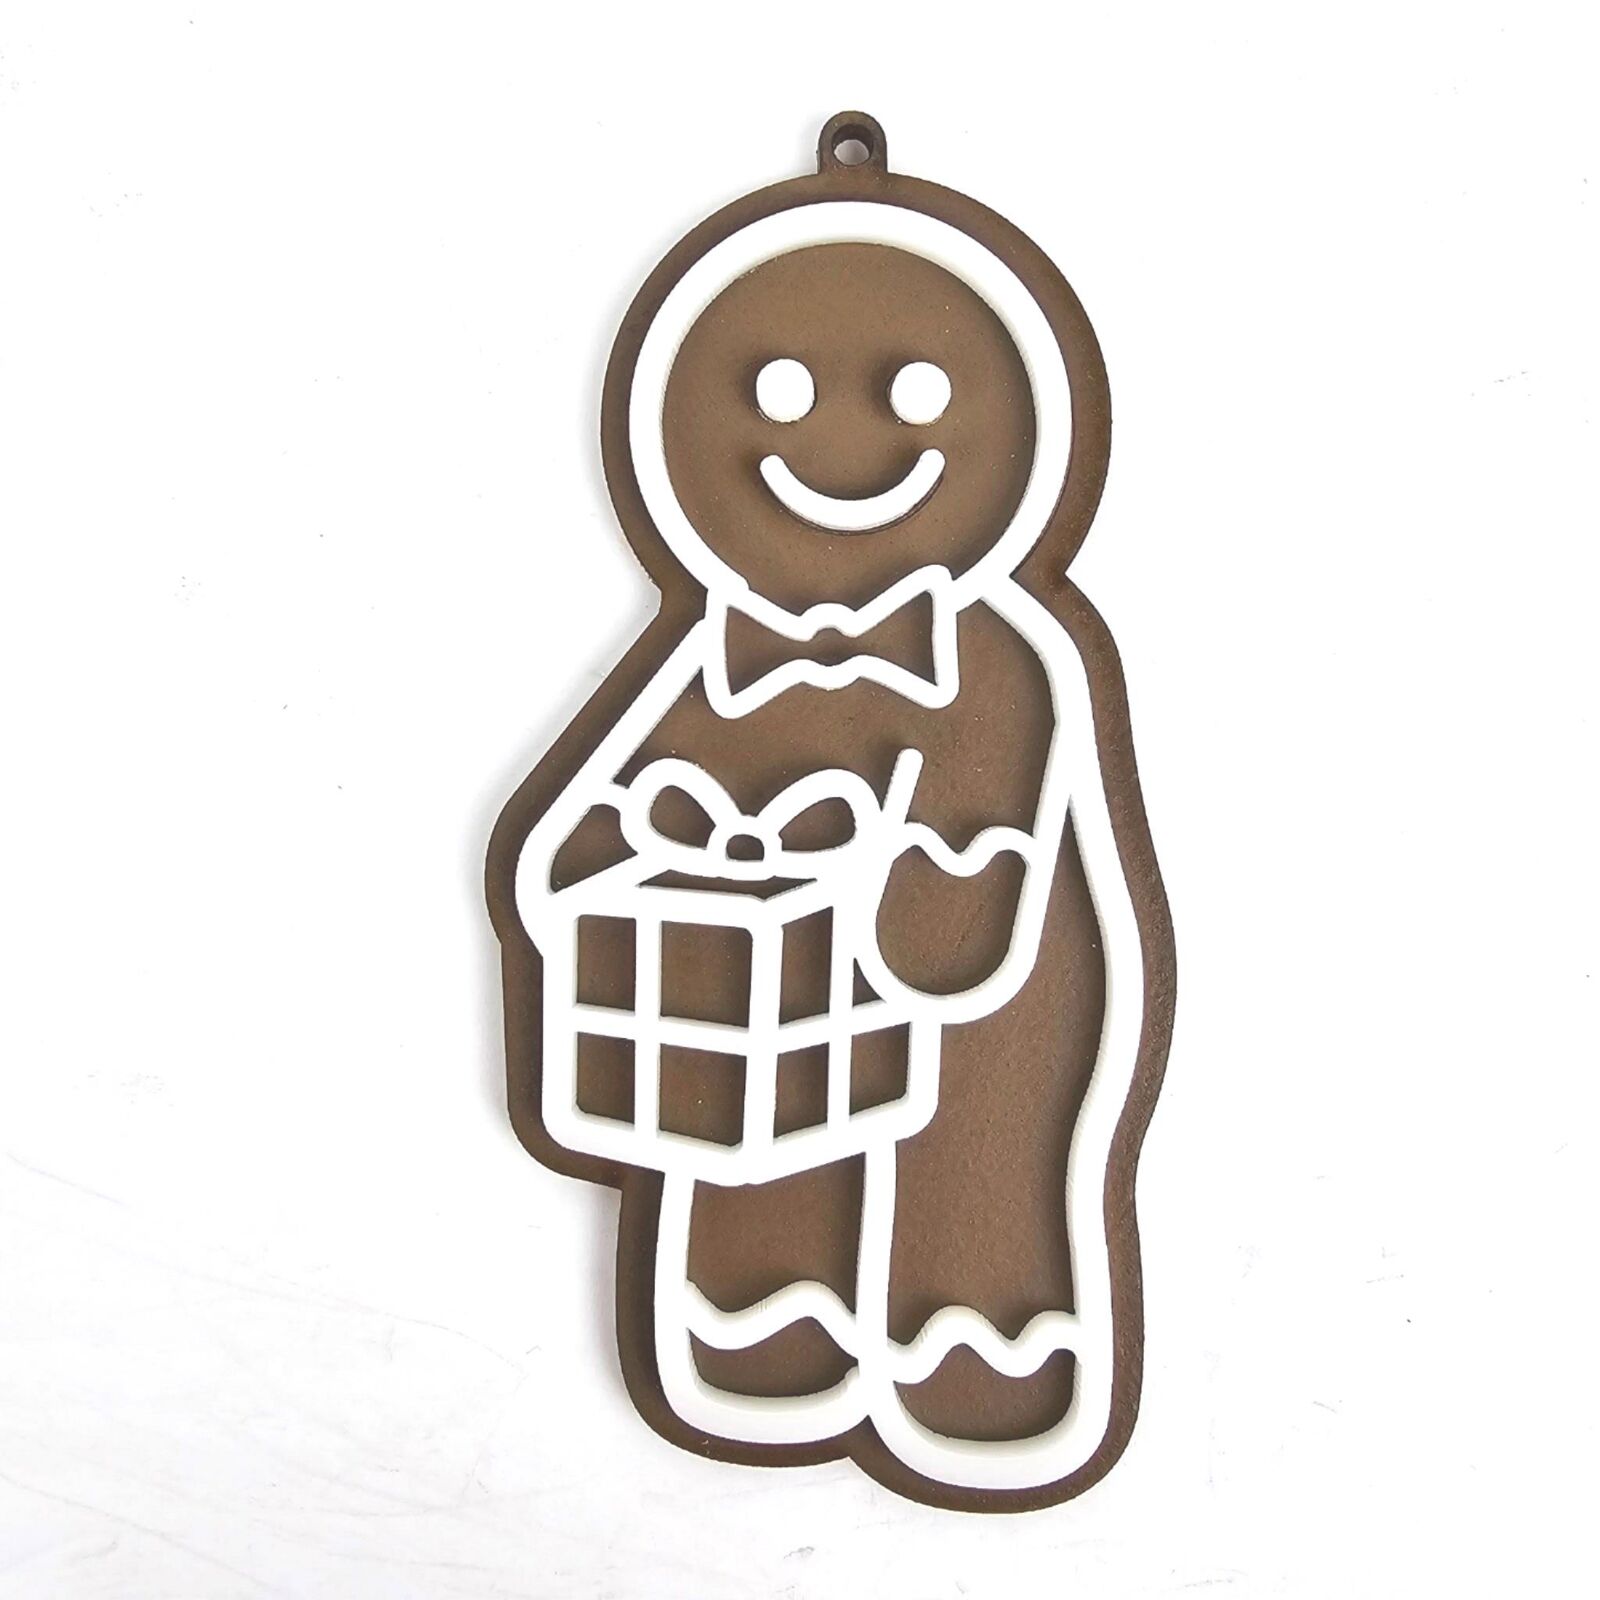 Naughty Gingerbread Cookie Christmas Ornament Adult Sexual Funny D**K In A Box